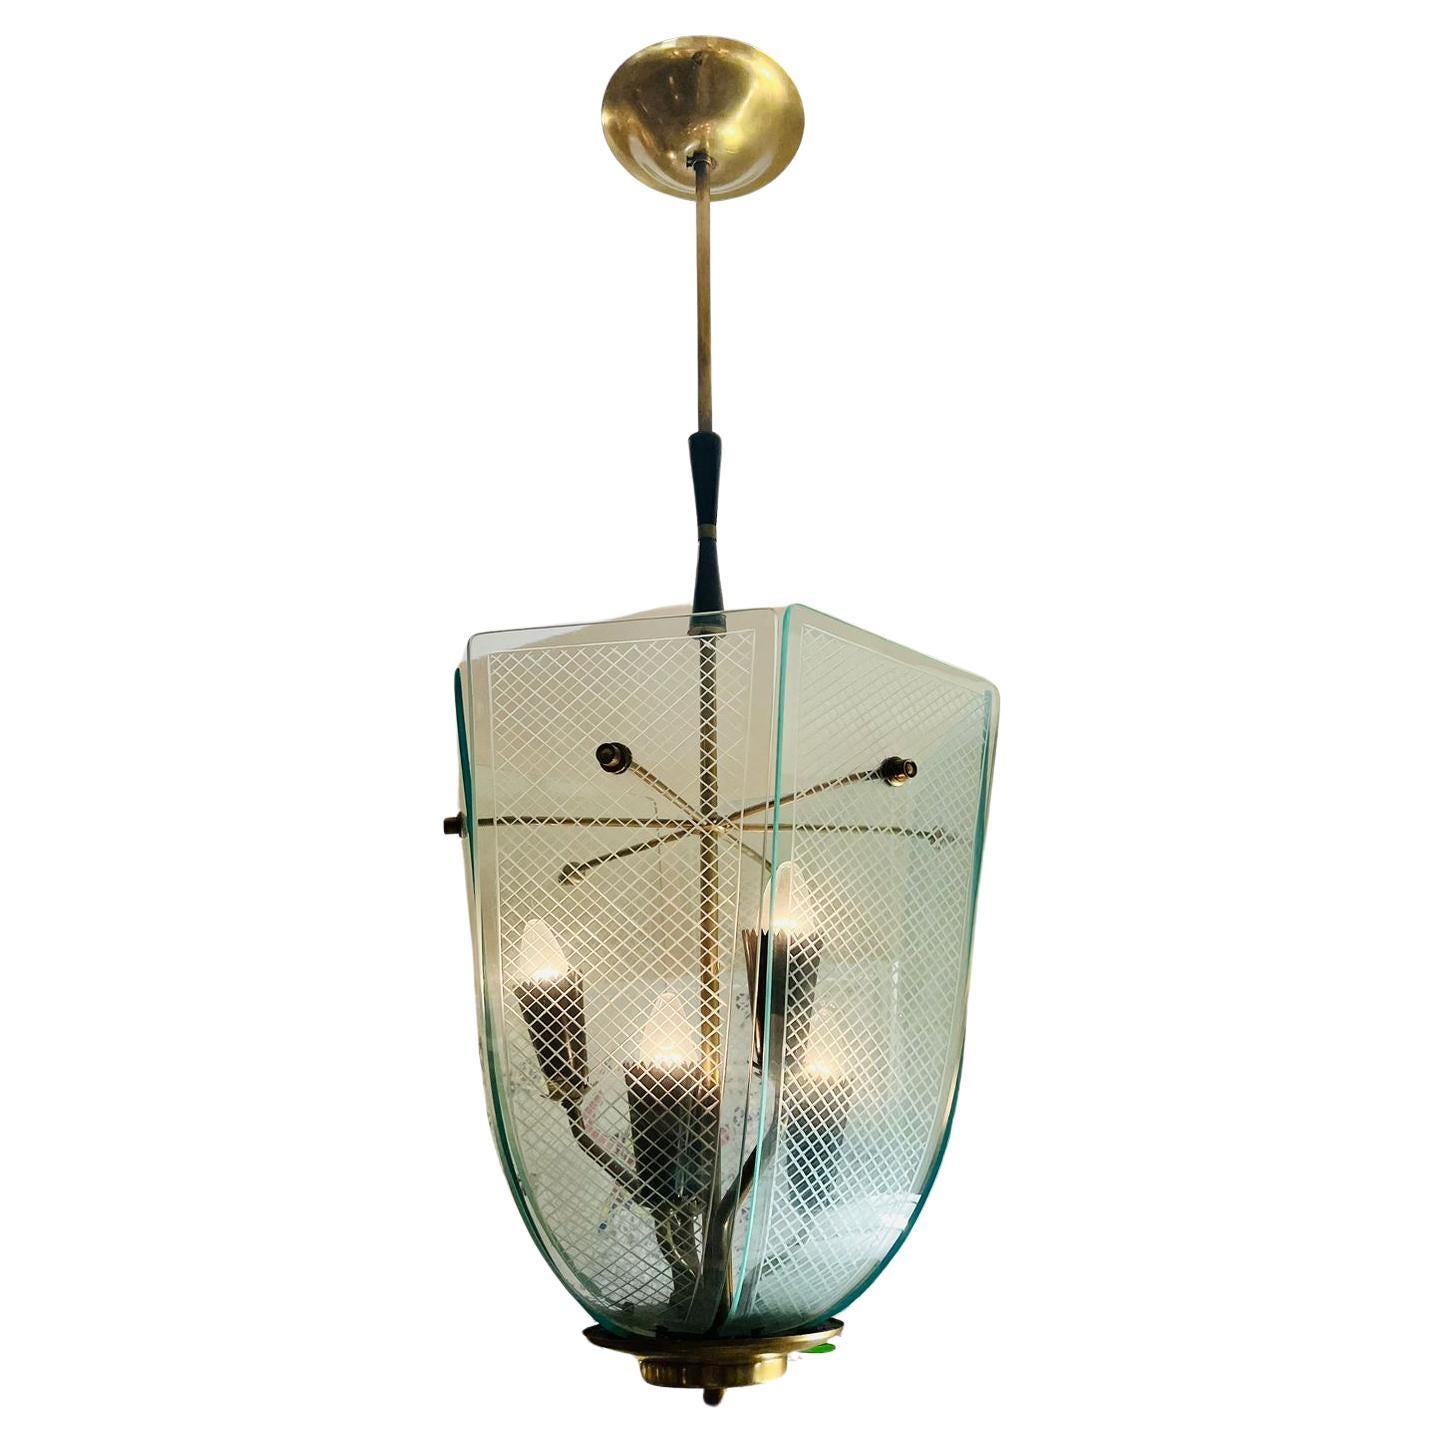 Fontana Arte by Pietro Chiesa chandelier in engraved glass and metal circa 1970